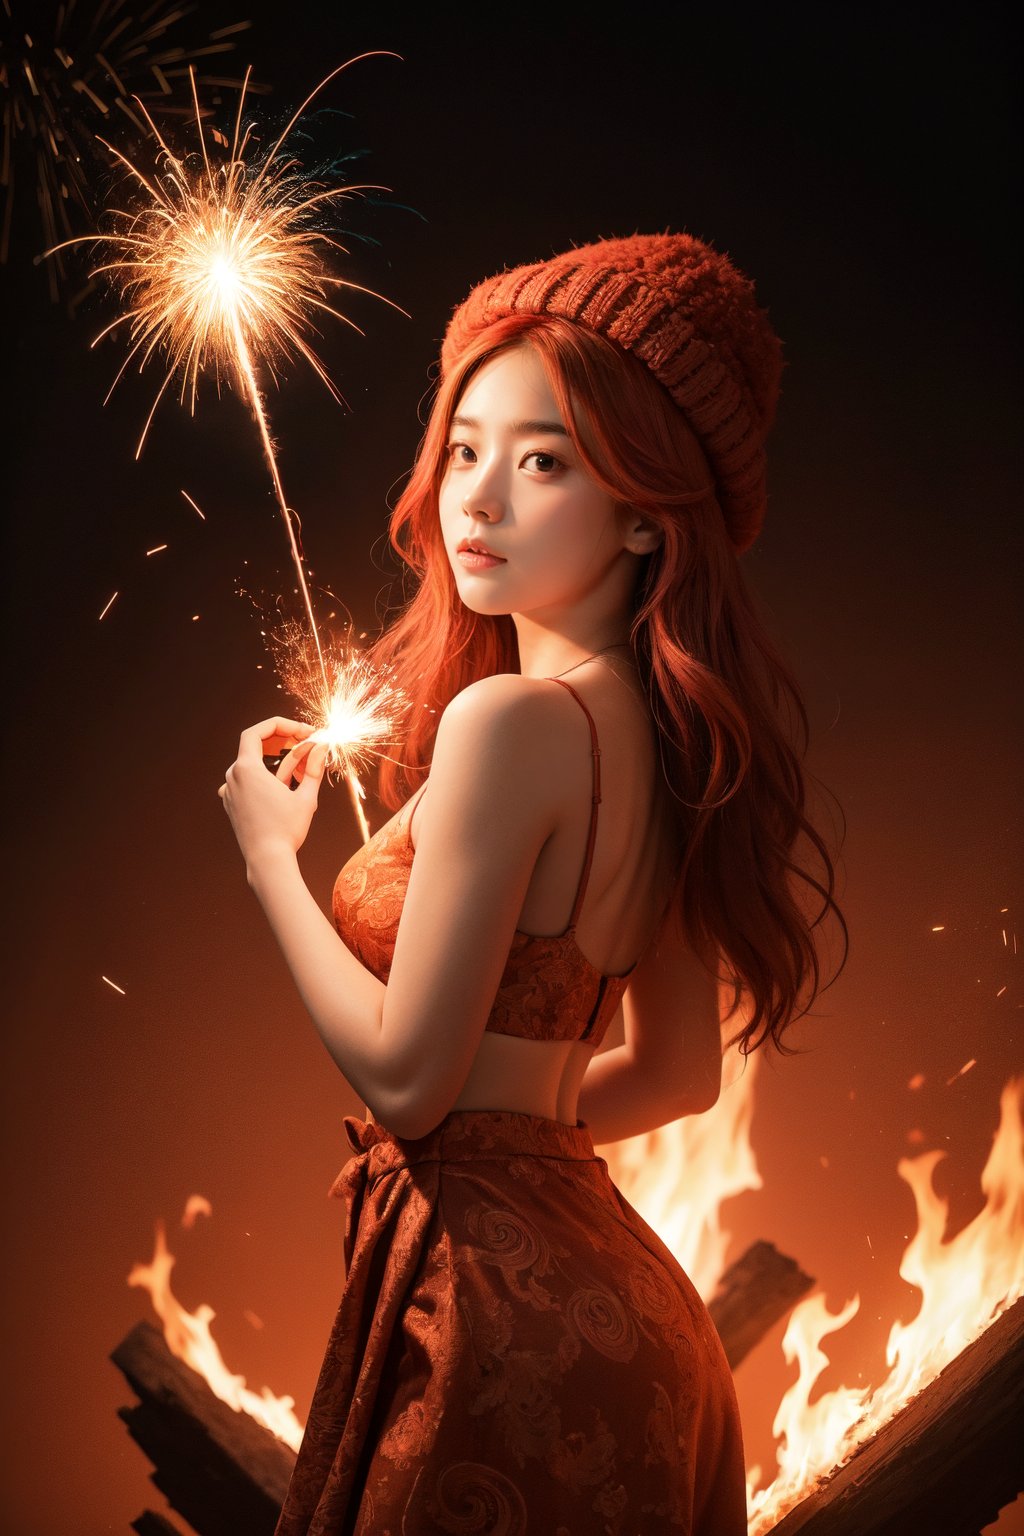 A breathtaking masterpiece depicts a lone girl, standing majestically amidst an intricate orange-red fractal background. Her flowing pink hair and bright red hat are illuminated by fiery sparks as she casts a fire spell. The camera captures her from the side, showcasing her striking blue-green eyes and delicate features as she leaps into the air, surrounded by swirling flames.